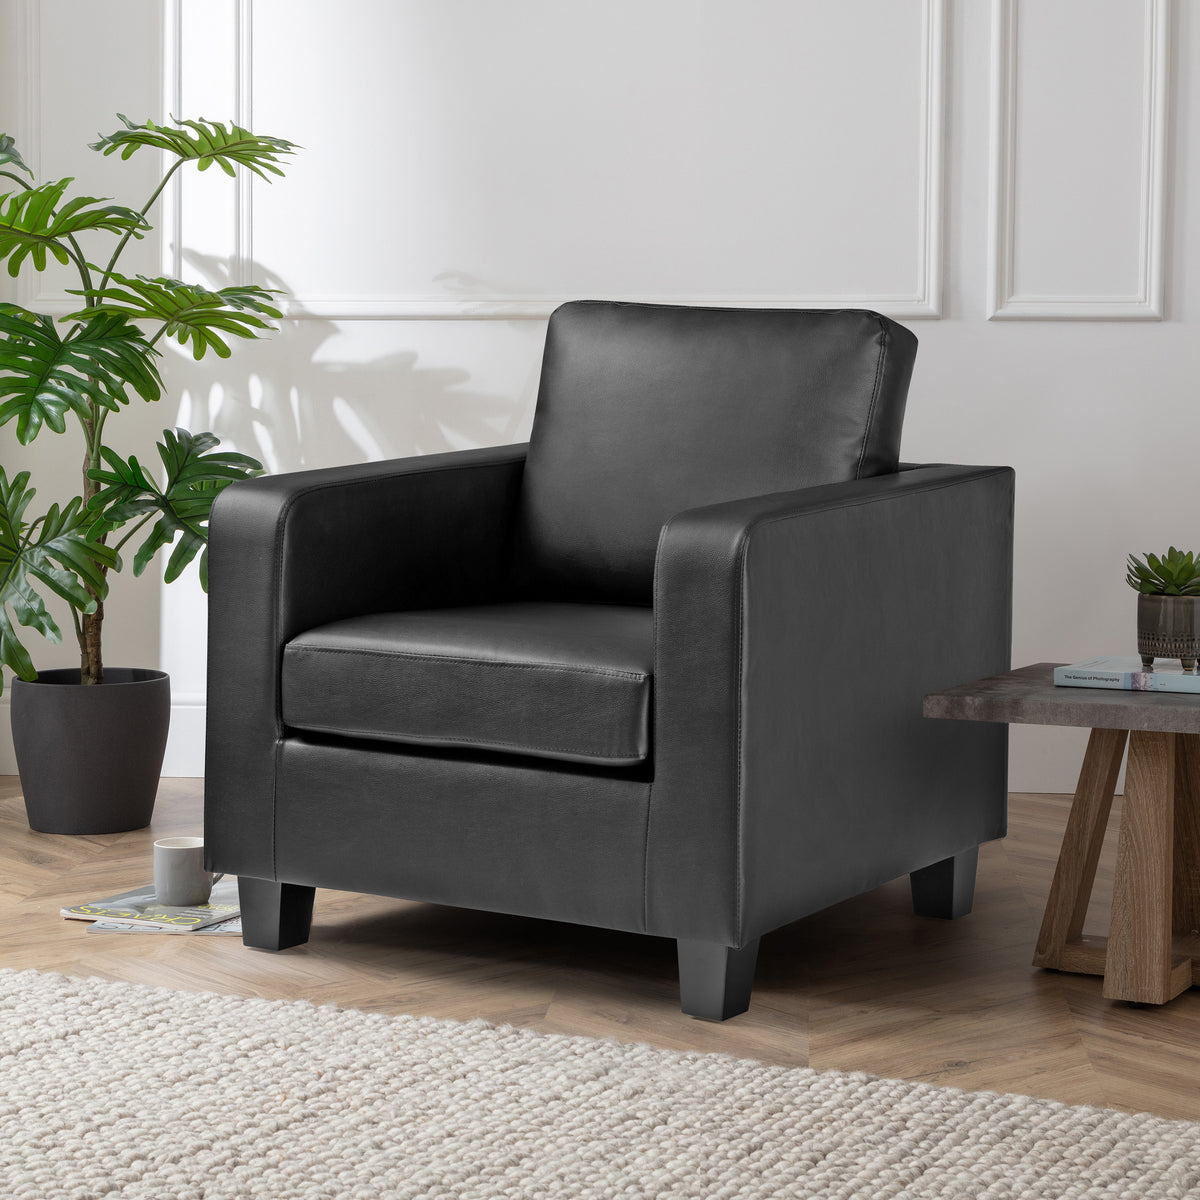 Cullen Faux Leather Armchair for living room